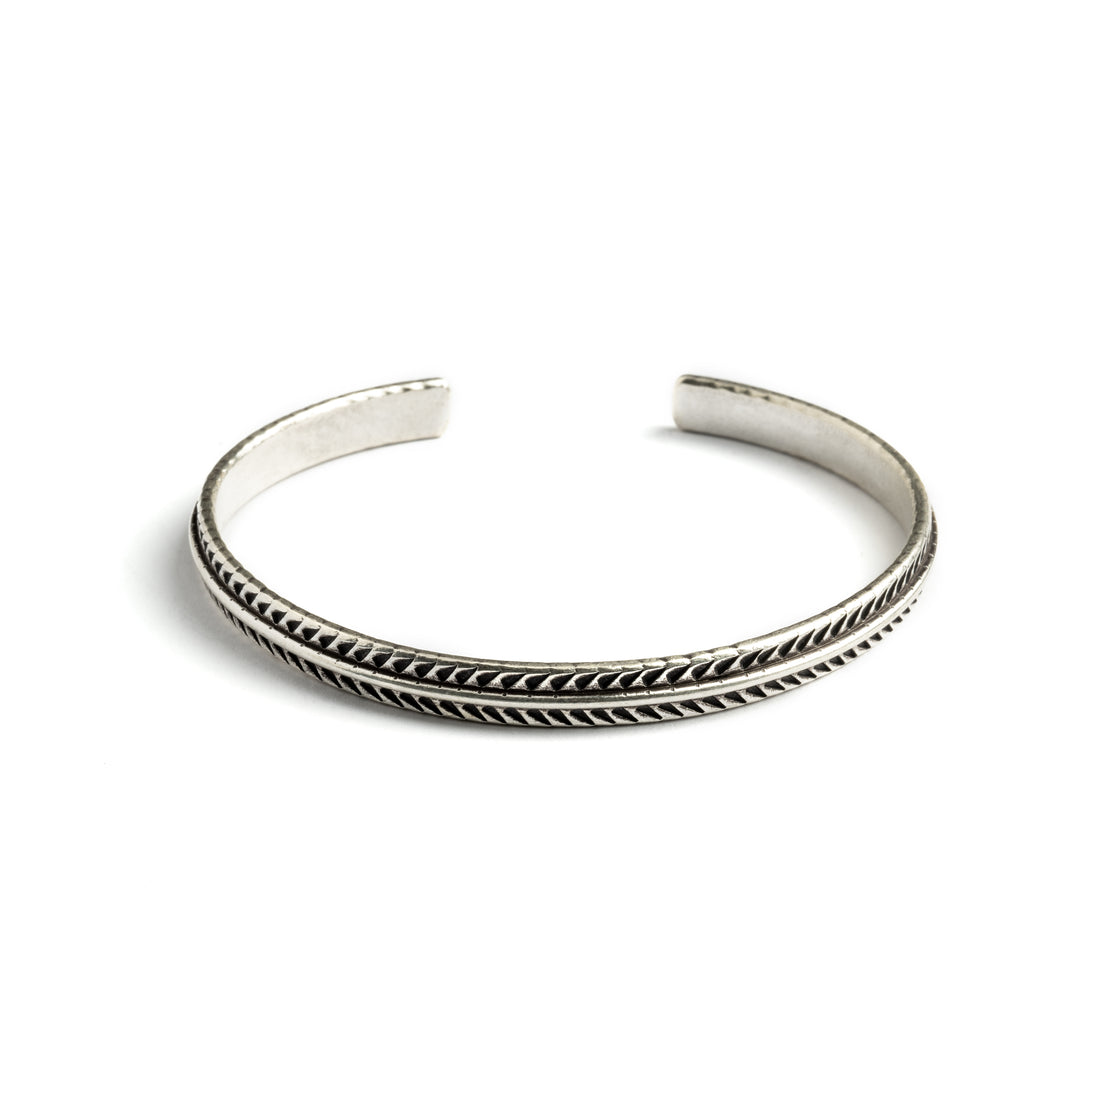 Silver Beam cuff frontal view